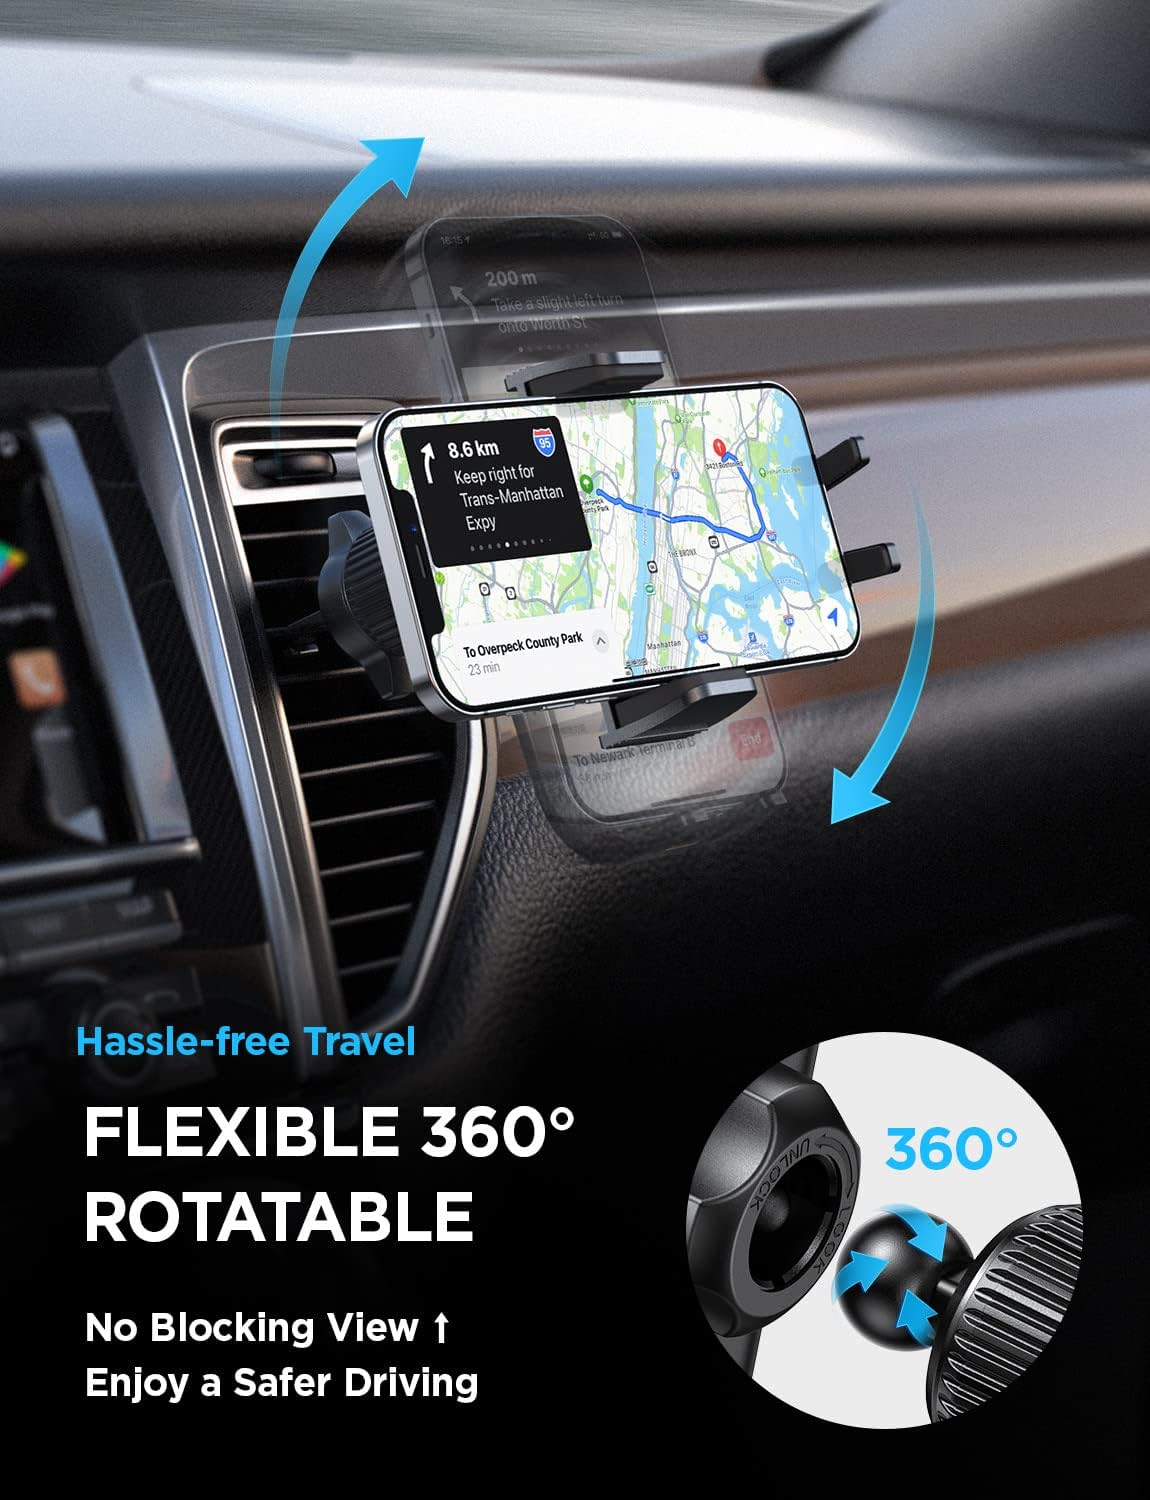 (⏰ Last Day Sale- SAVE 48% OFF)2022 NEW Air Vent Car Phone Mount Holder